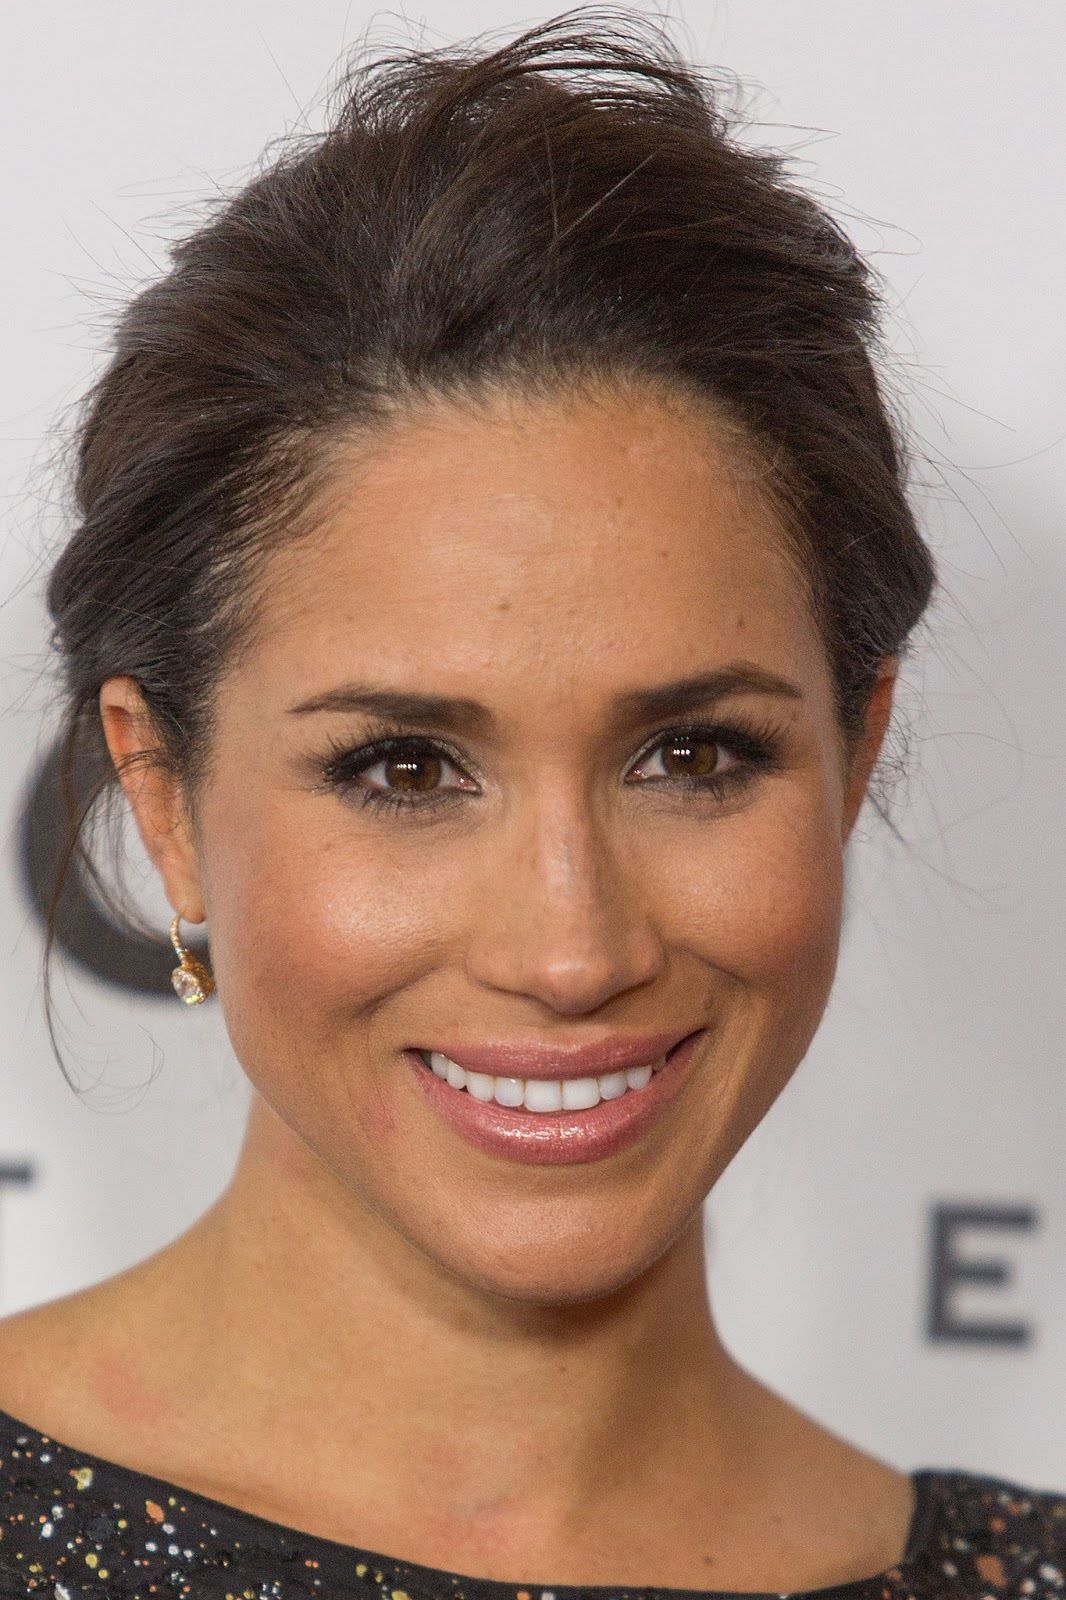 Free Download Meghan Markle High Quality Wallpaper For iPhone on our website with great care. You can searc. Meghan markle photo, Meghan markle, Kate and meghan